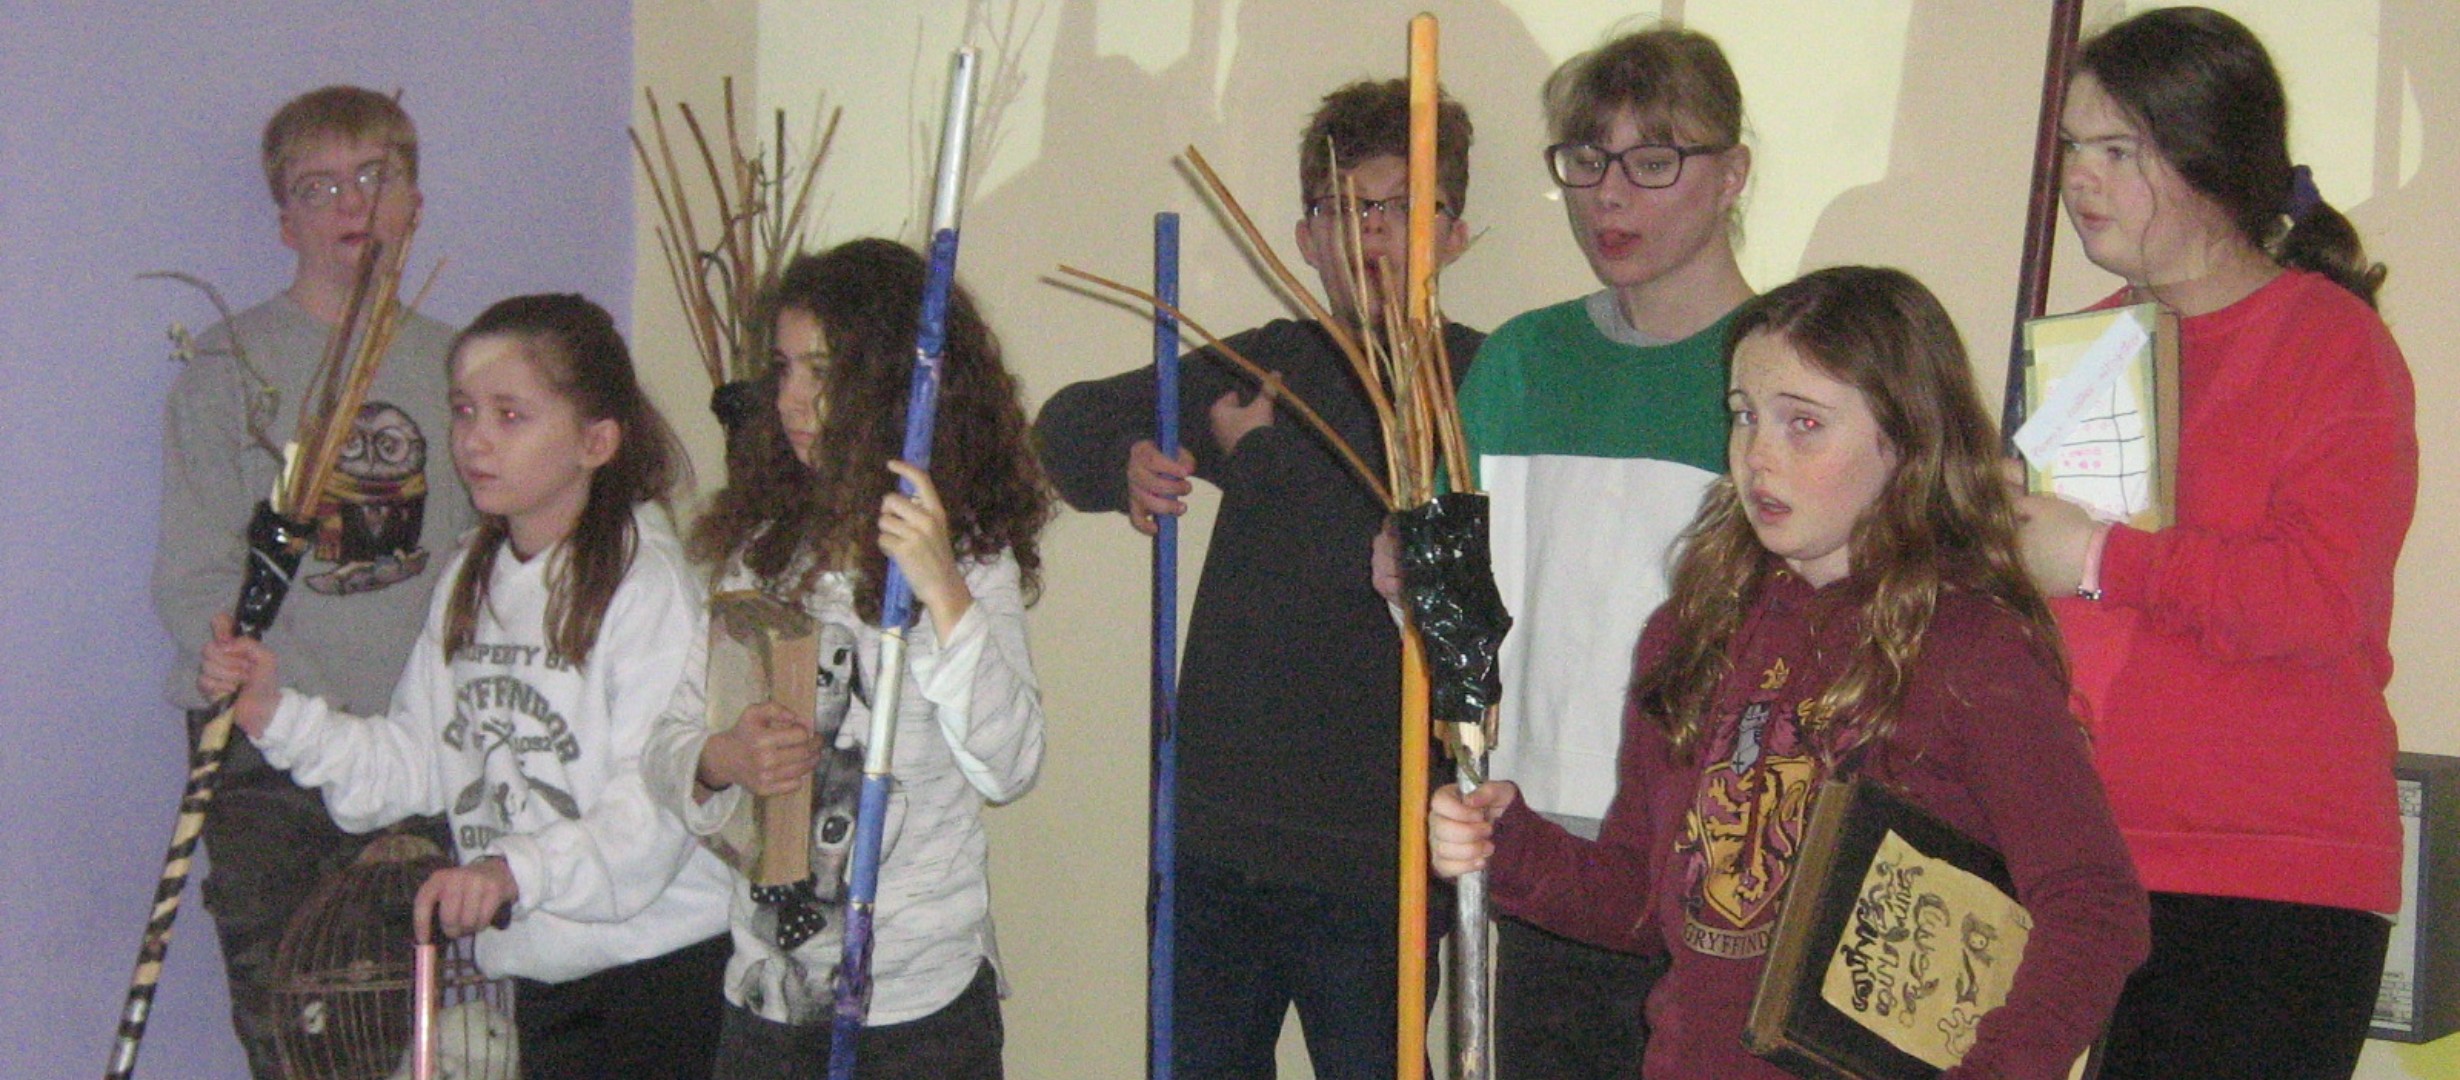 A group of young people stood in a group all holding broom sticks in their hands